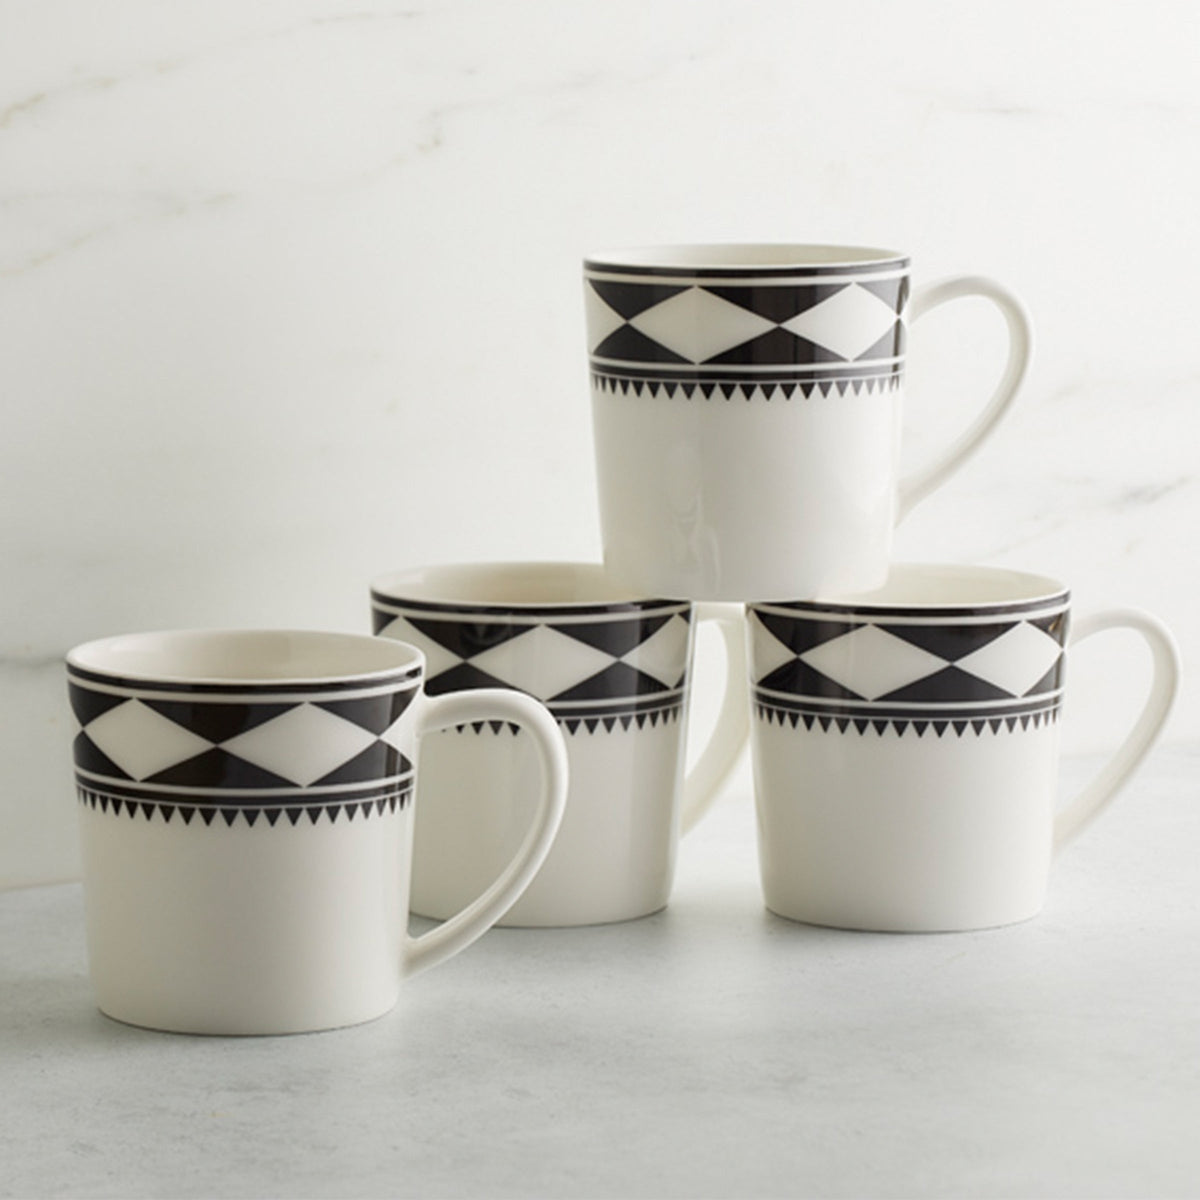 Four white Fez Mugs with black geometric patterns, inspired by Moroccan designs, are stacked on a gray surface against a white marble background. Made from high-fired porcelain by Caskata Artisanal Home, these beautiful mugs are both dishwasher and microwave safe.